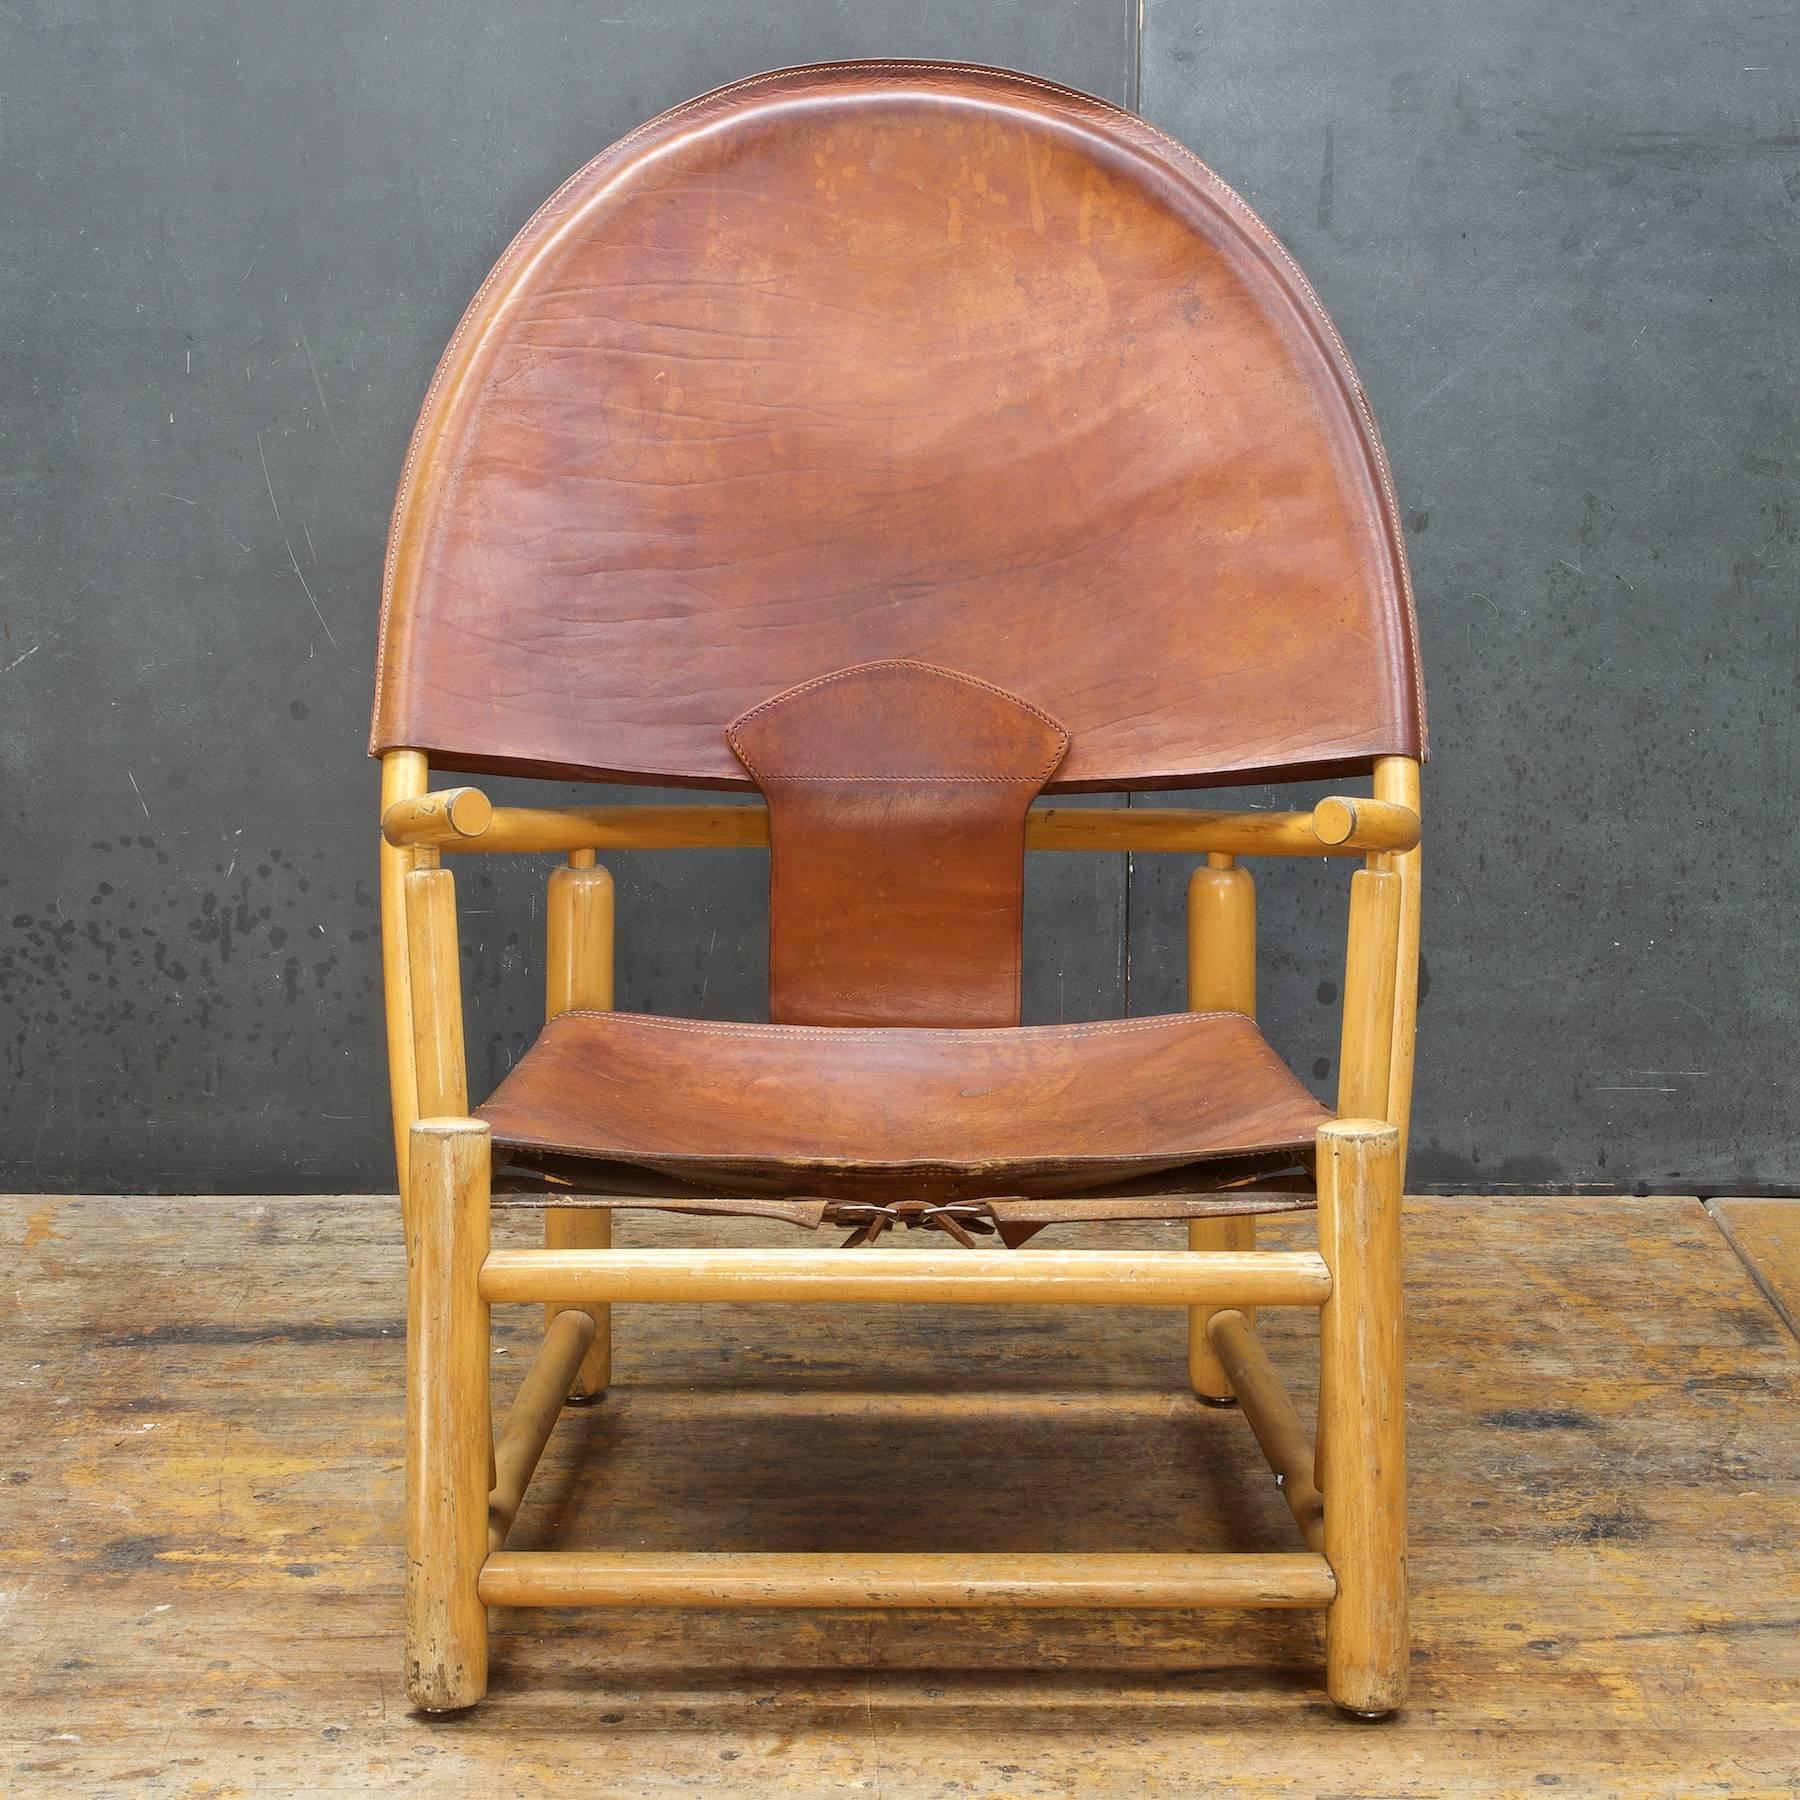 Rare design by lesser known architects; Werther Toffoloni and Piero Palange (not Borge Mogensen.) This hoop lounge chair is strong, sturdy and usable. The original leather sling is in very good condition. It is showing its age, was well used and